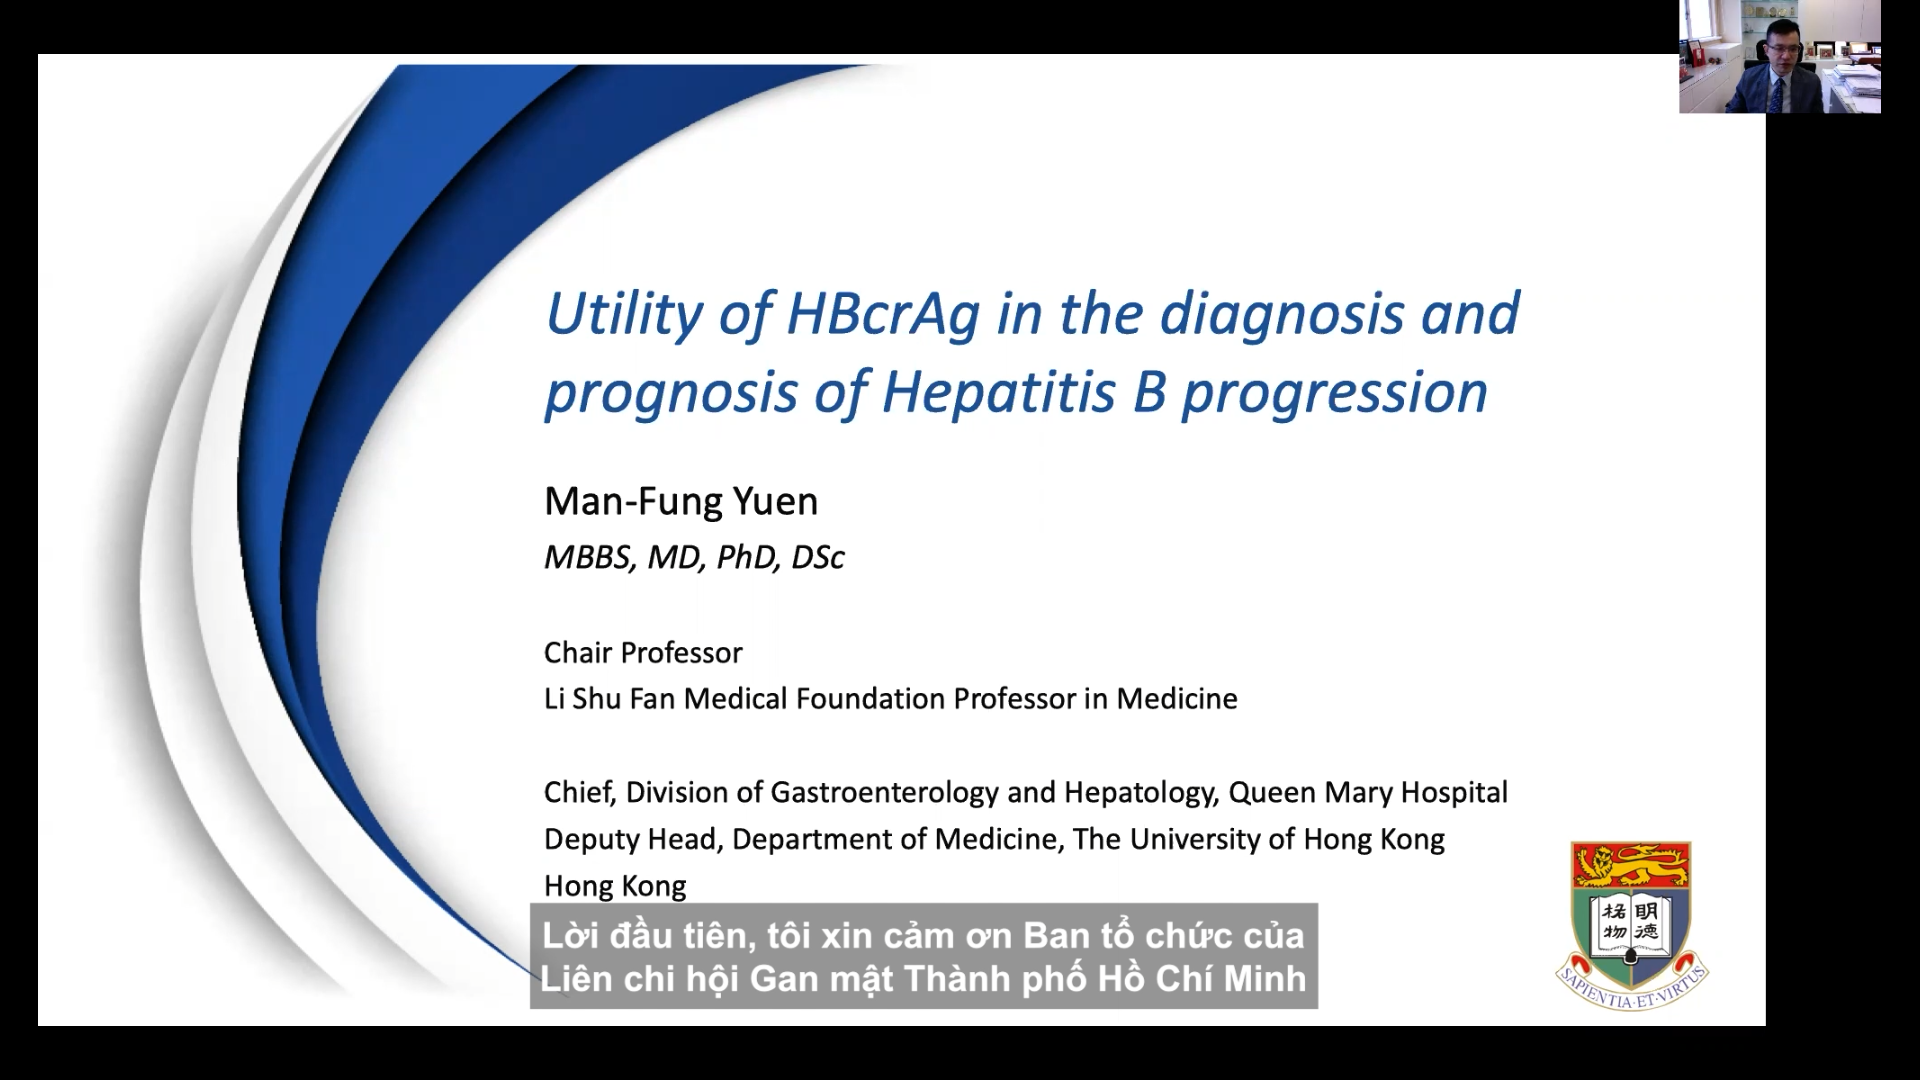 Utility of HBcrAg in the diagnosis and prognosis of Hepatitis B progression